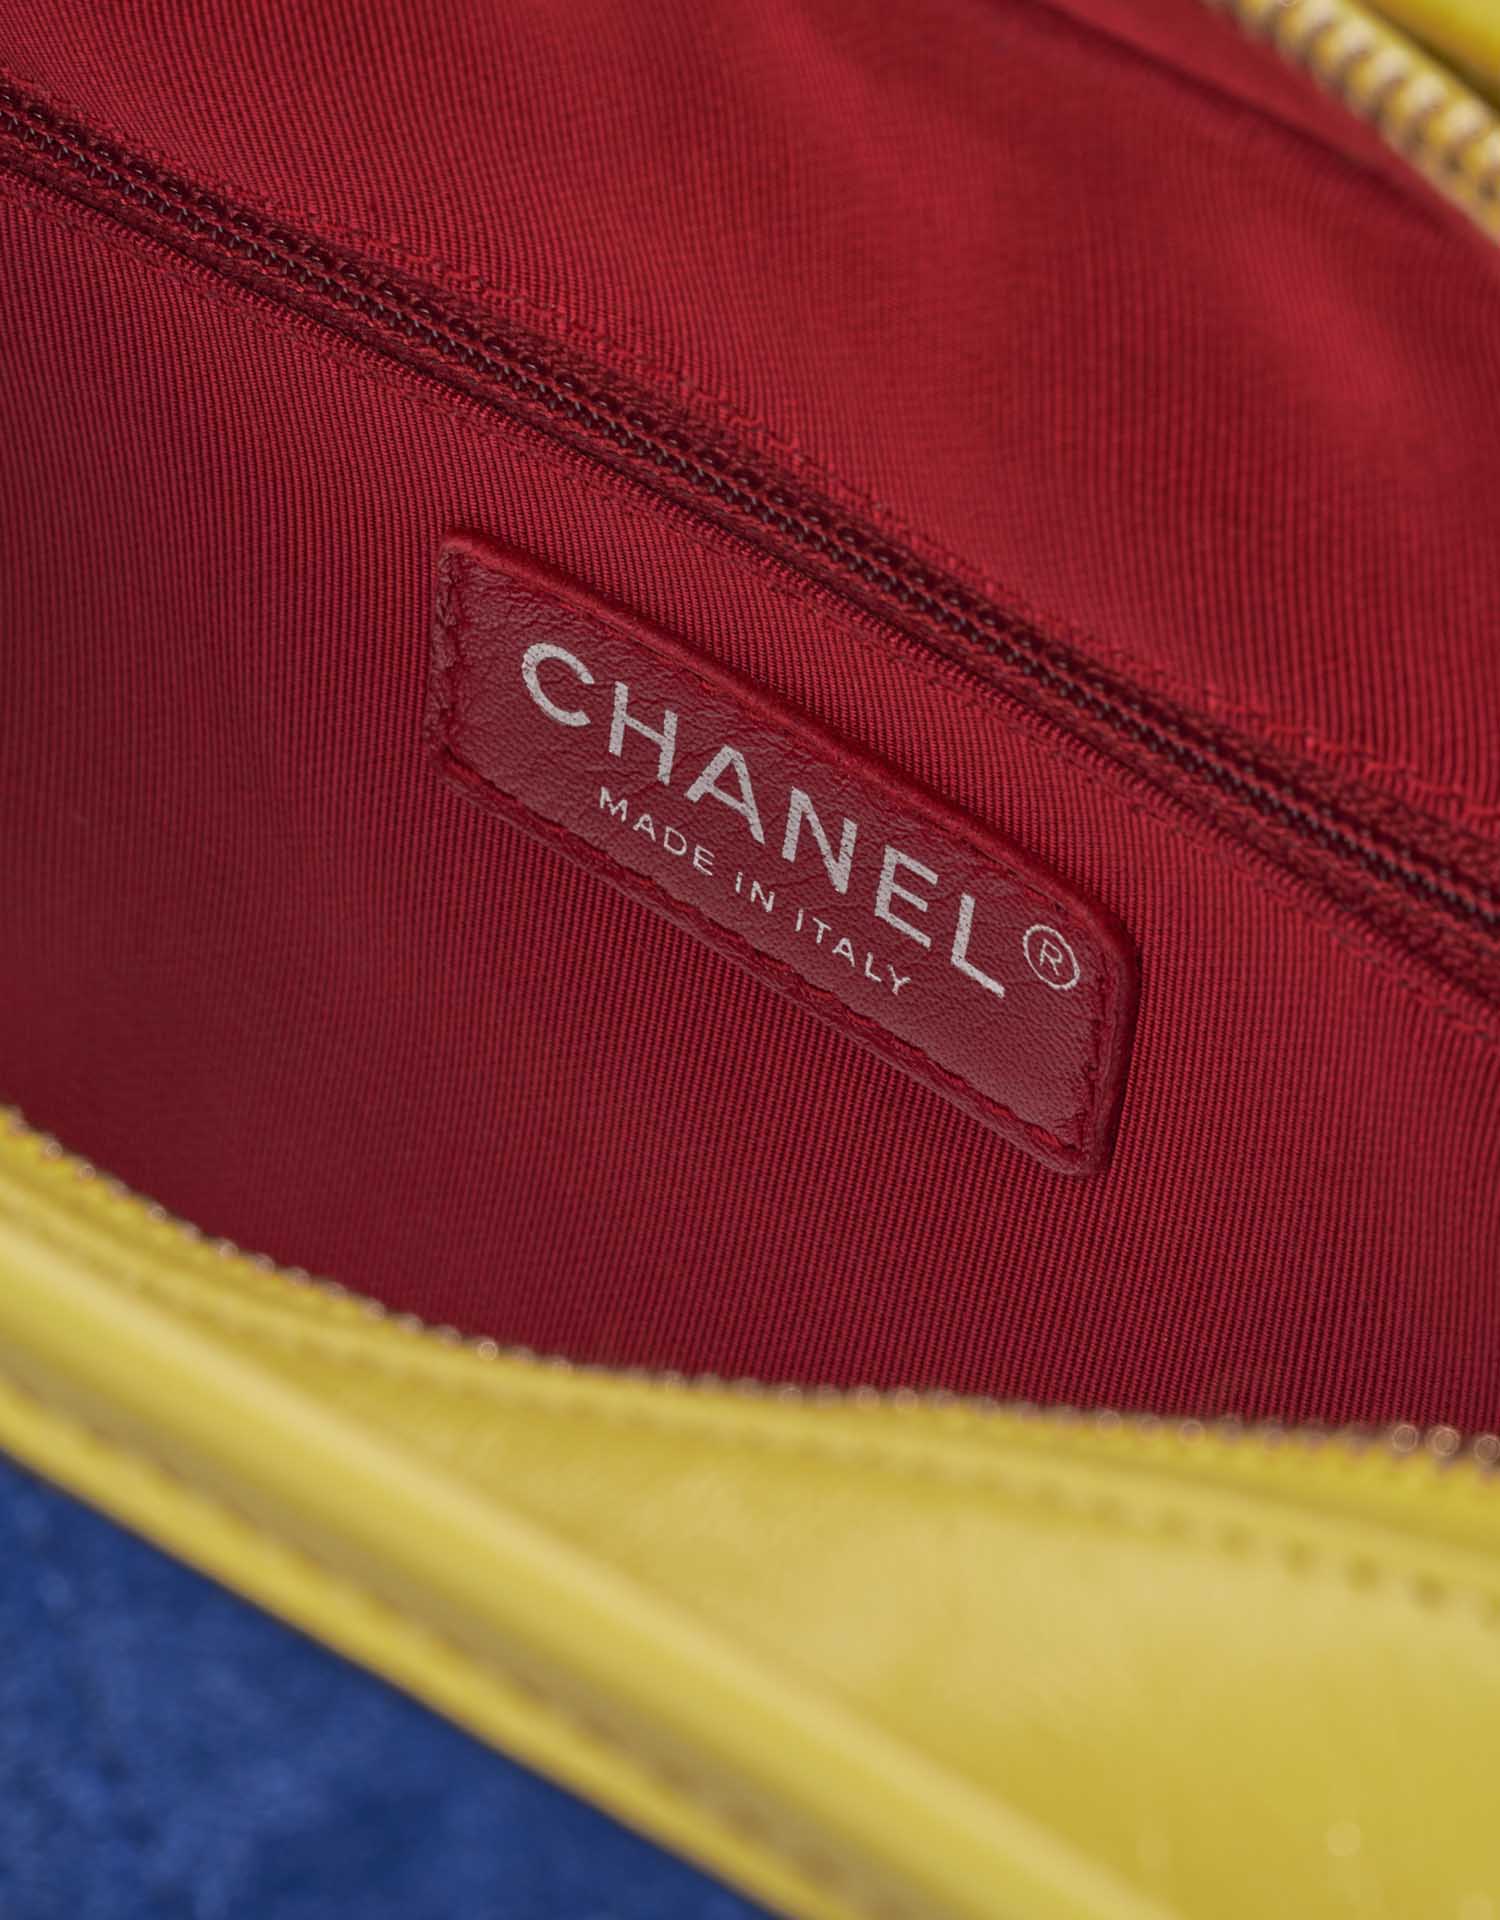 Pre-owned Chanel bag Gabrielle Medium Calf / Suede Blue / Red / Yellow Blue, Multicolour Logo | Sell your designer bag on Saclab.com